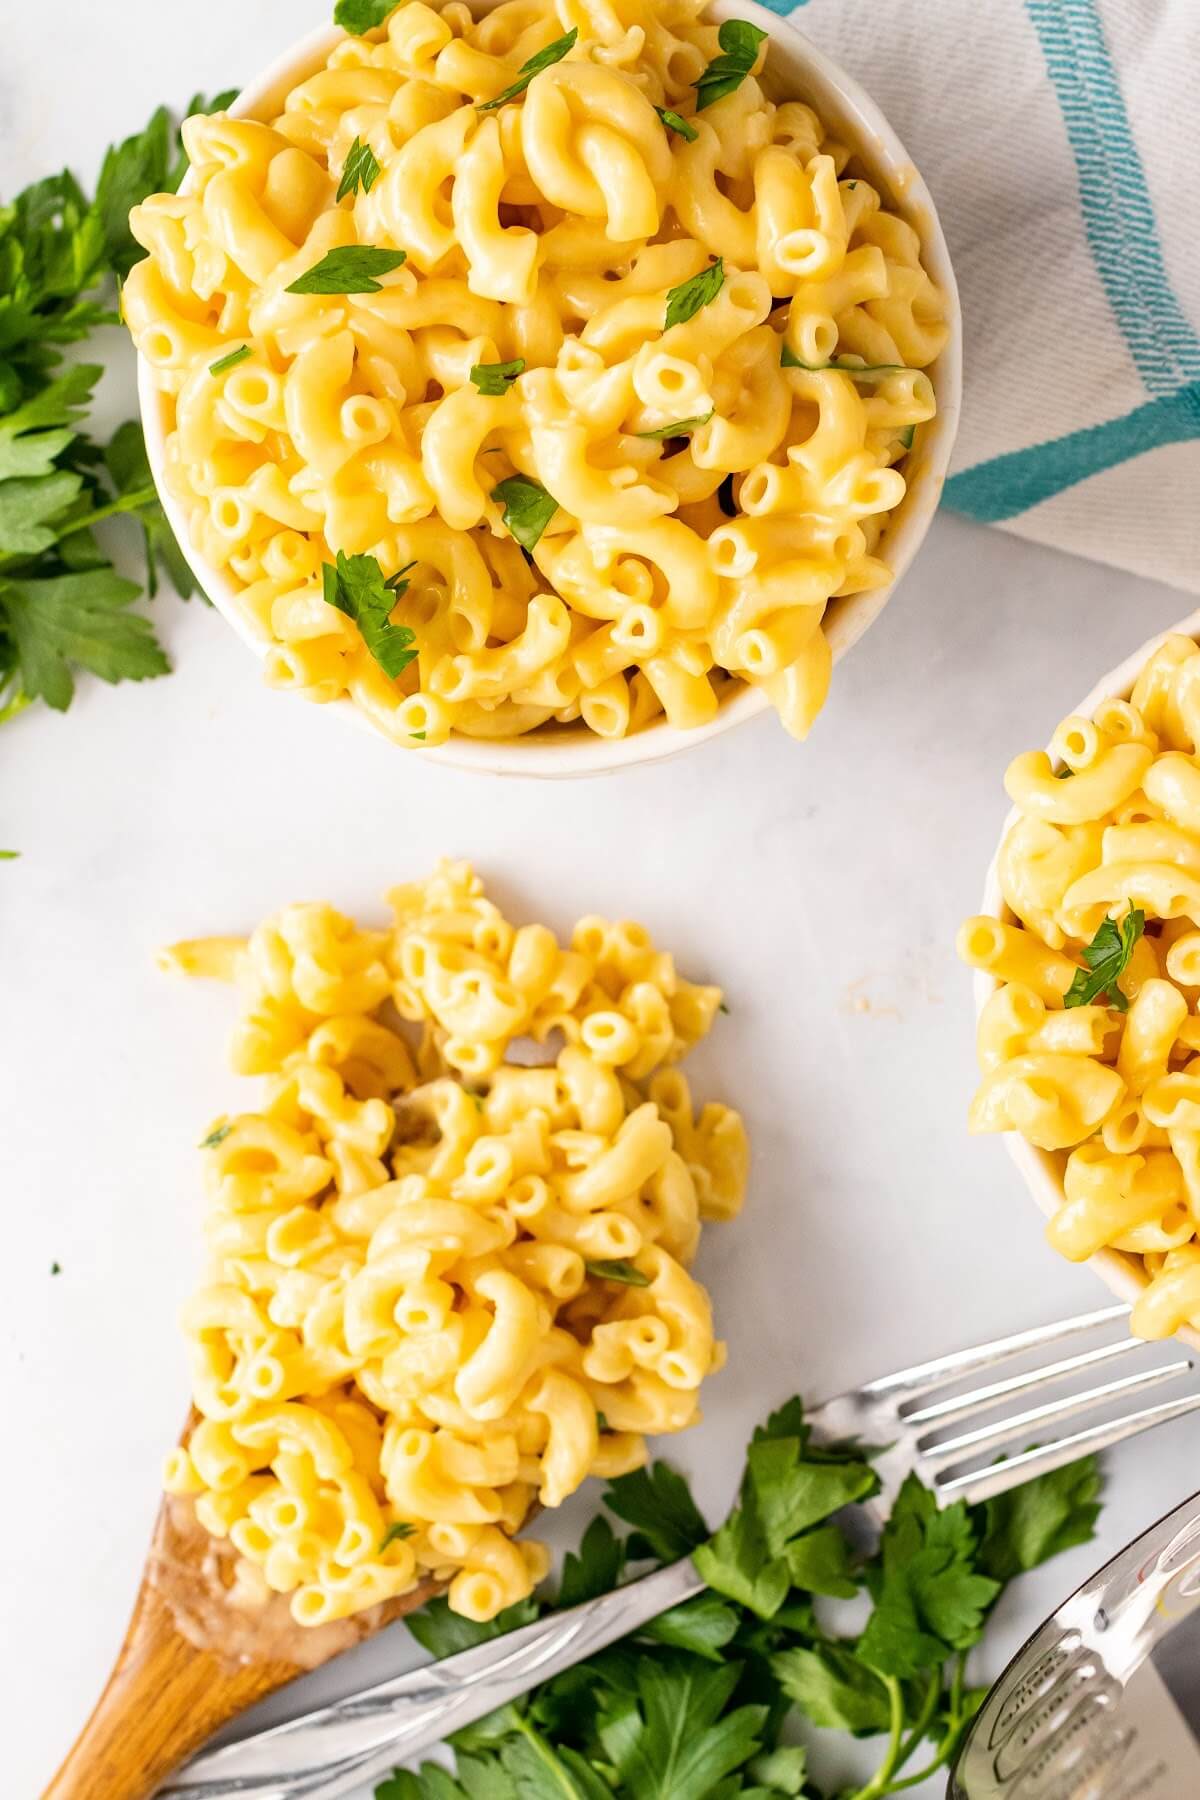 Two bowls full of homemade Mac and cheese, garnished with fresh parsley sitting next to a fork, a wooden spoon full of Mac and cheese, fresh Italian parsley sprigs, a cloth kitchen towel and an Instant Pot.